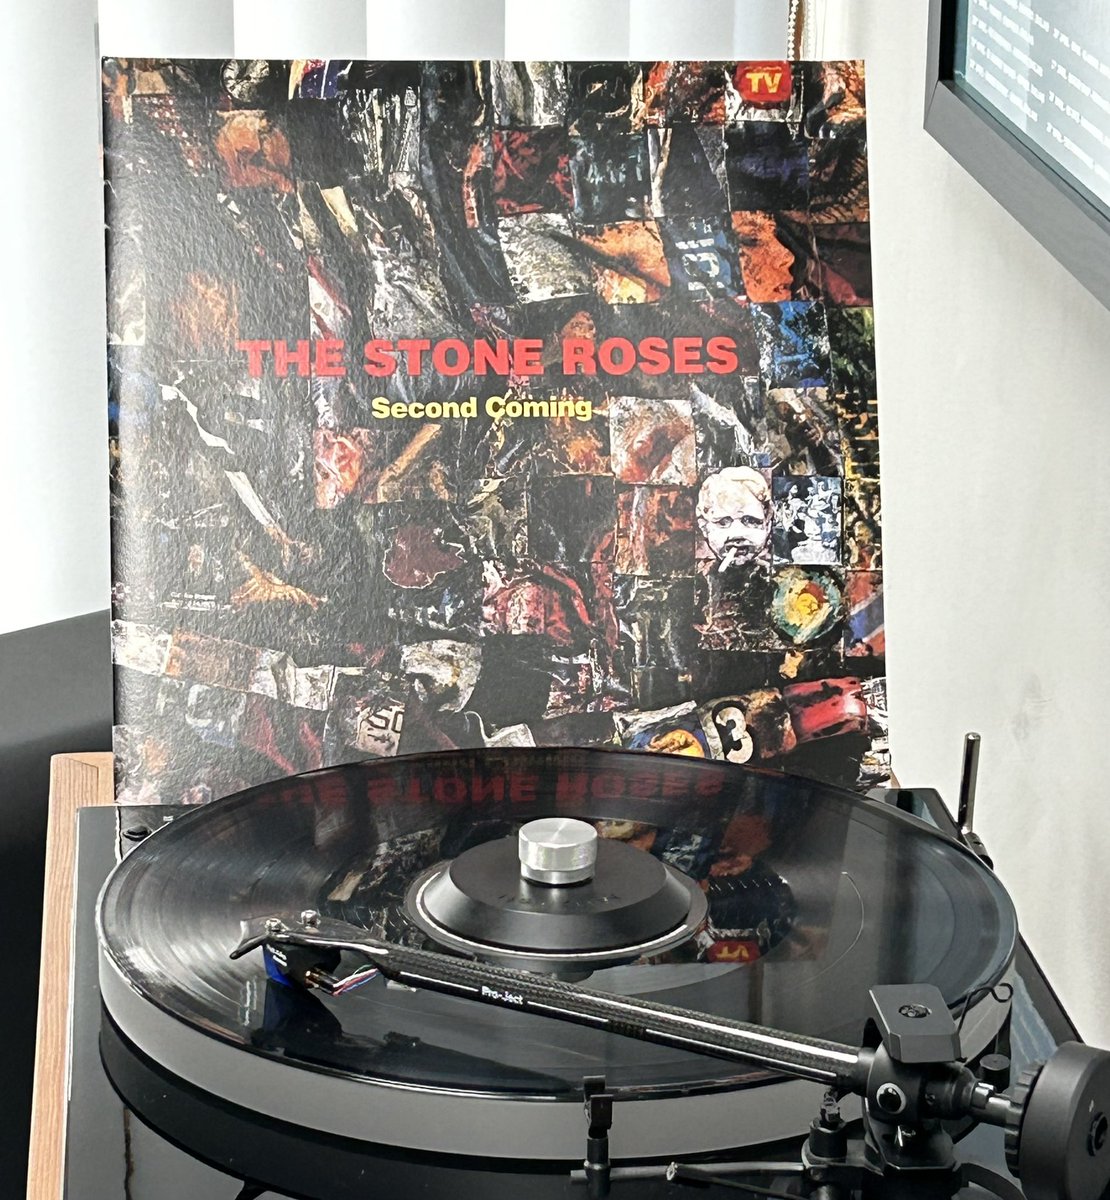 #5albums90s2

The Stone Roses - Second Coming

Divides the music community like no other, but for me and those who know, it’s pure perfection, Squire & Reni in particular are on fire & in their element on SC. An album that is a completely different beast on vinyl, in my 5 🙌🏻